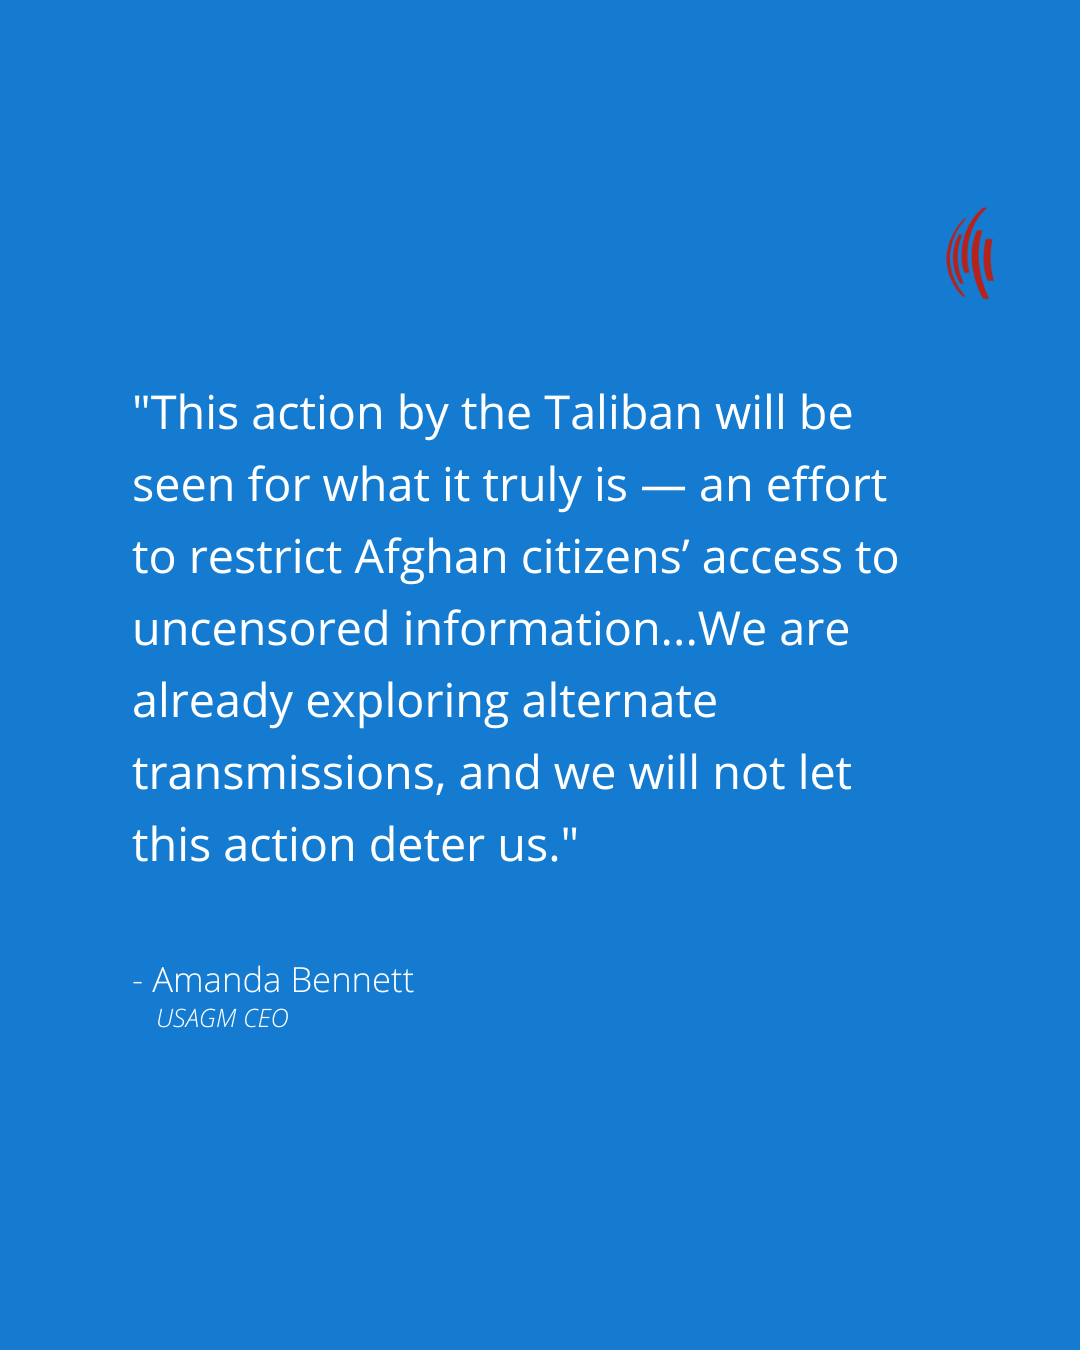 CEO Bennett condemns media restrictions in Afghanistan